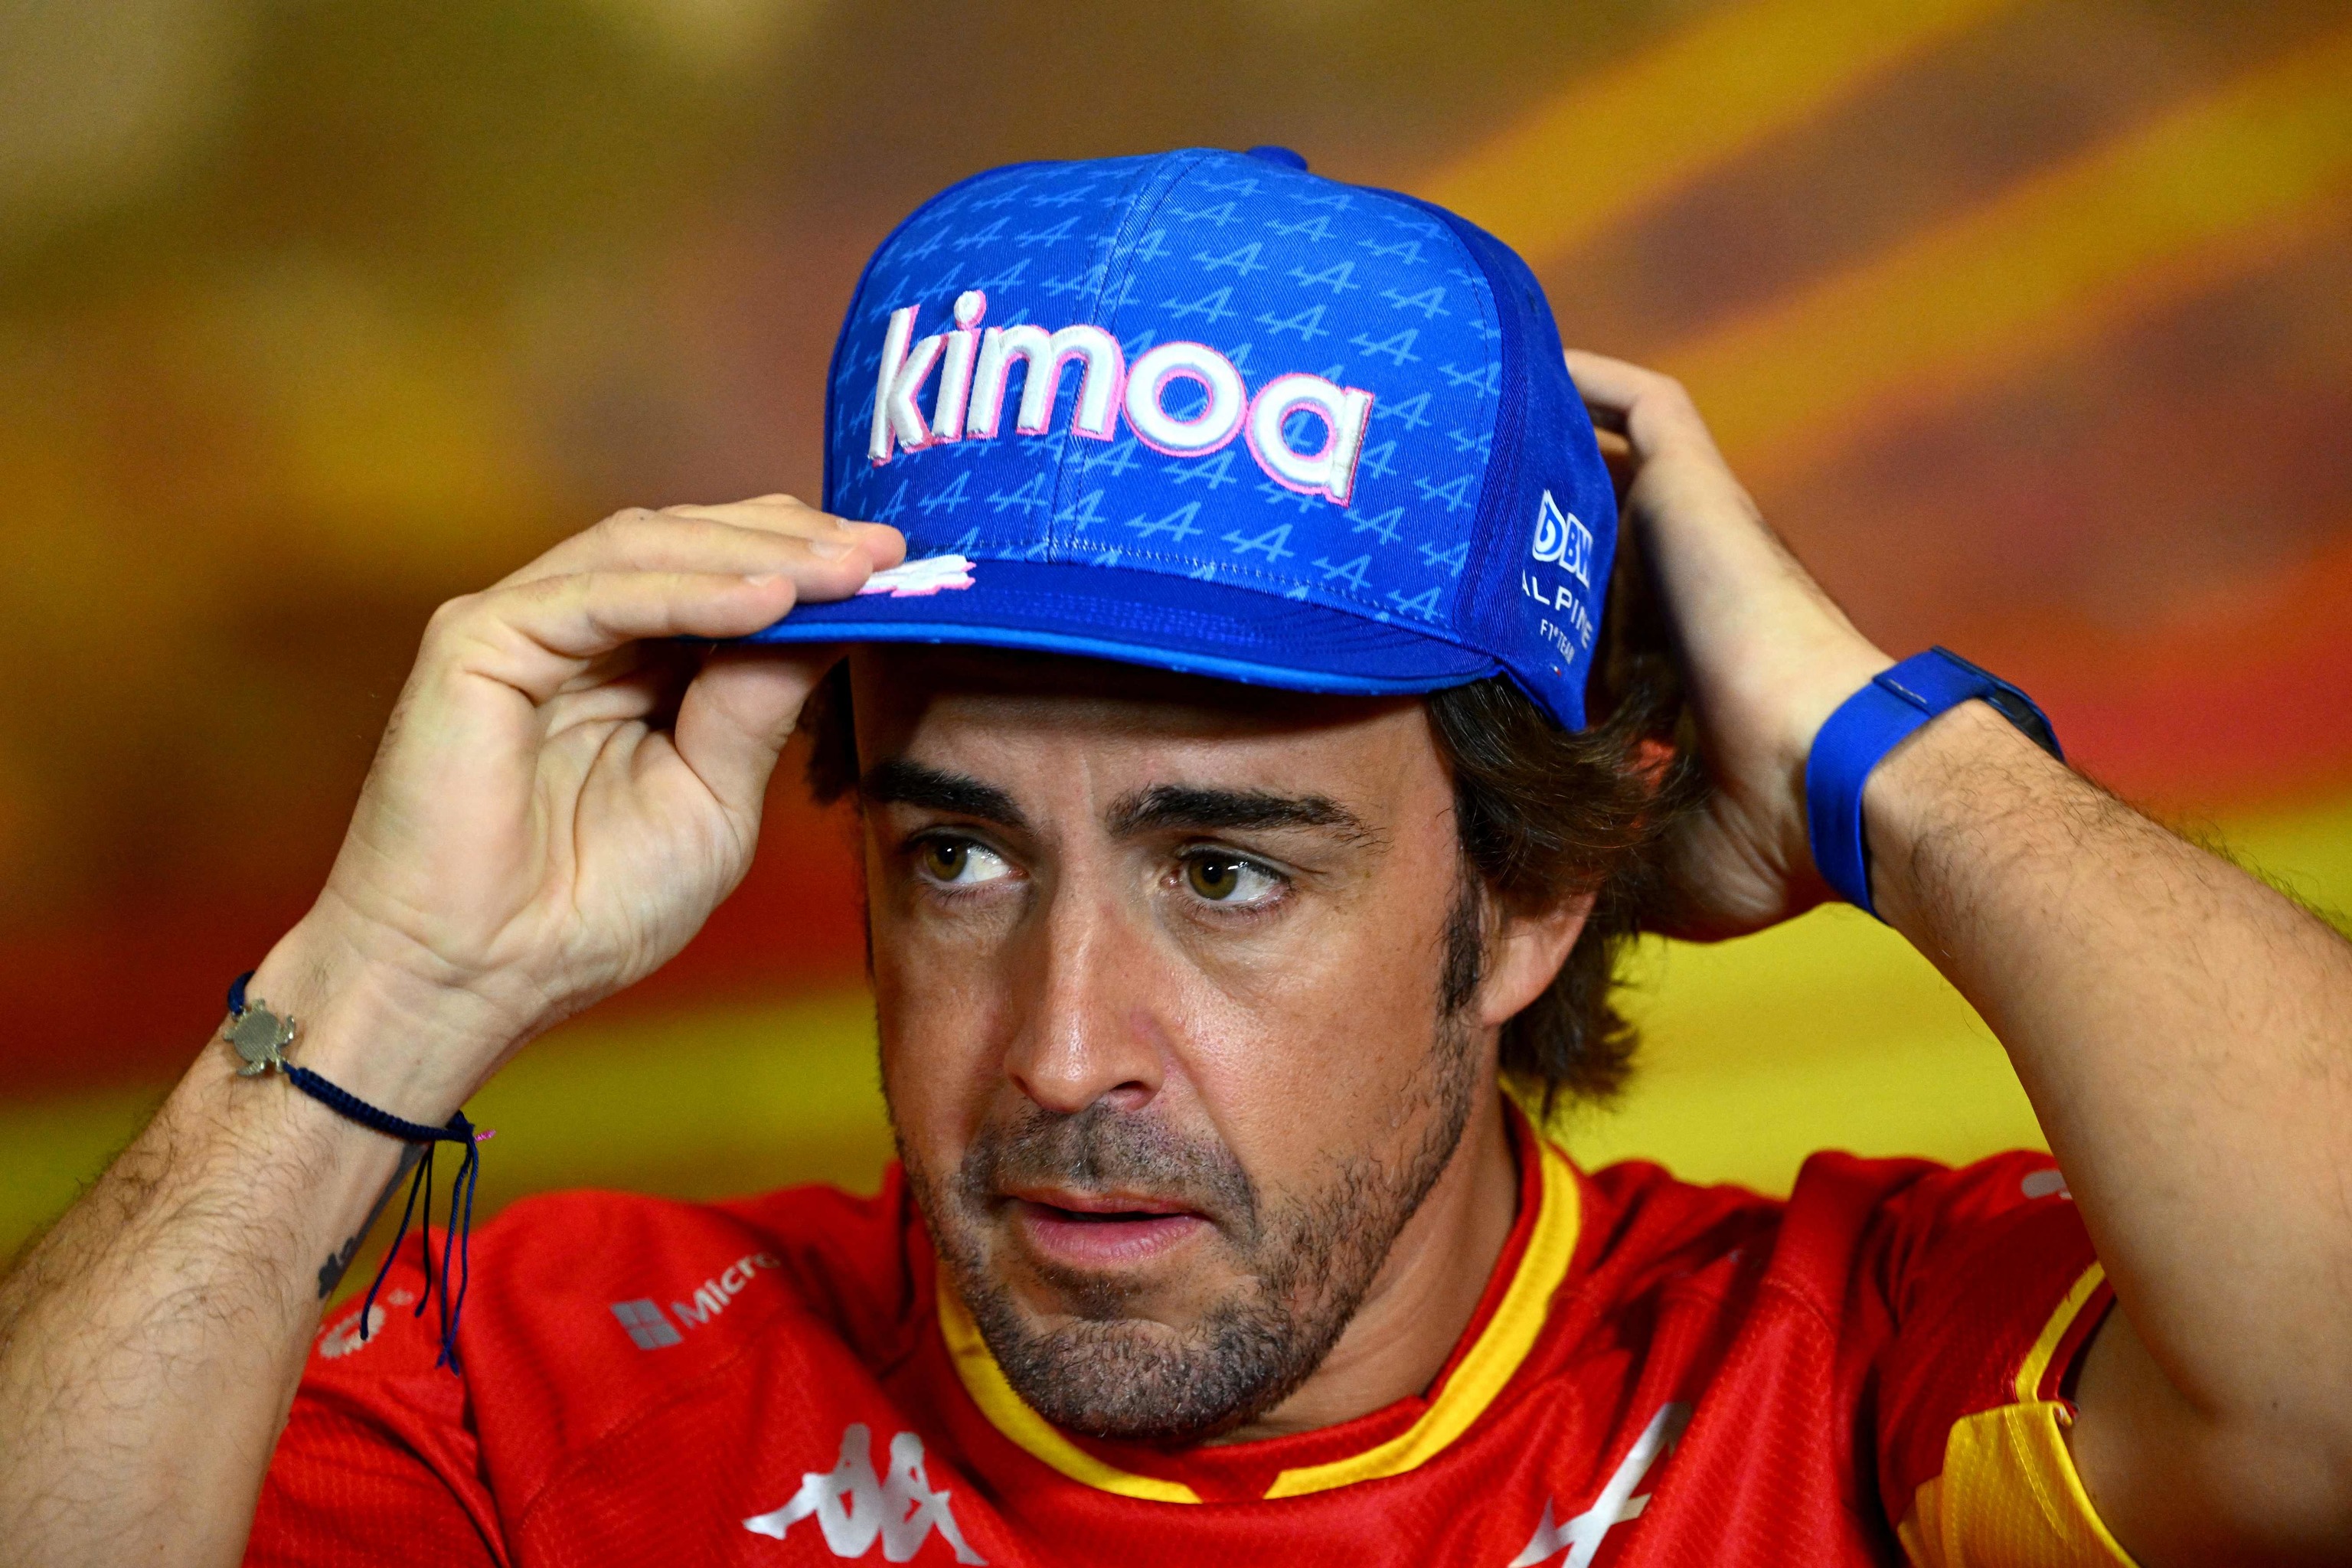 Alonso during the press conference in Montmale on Friday